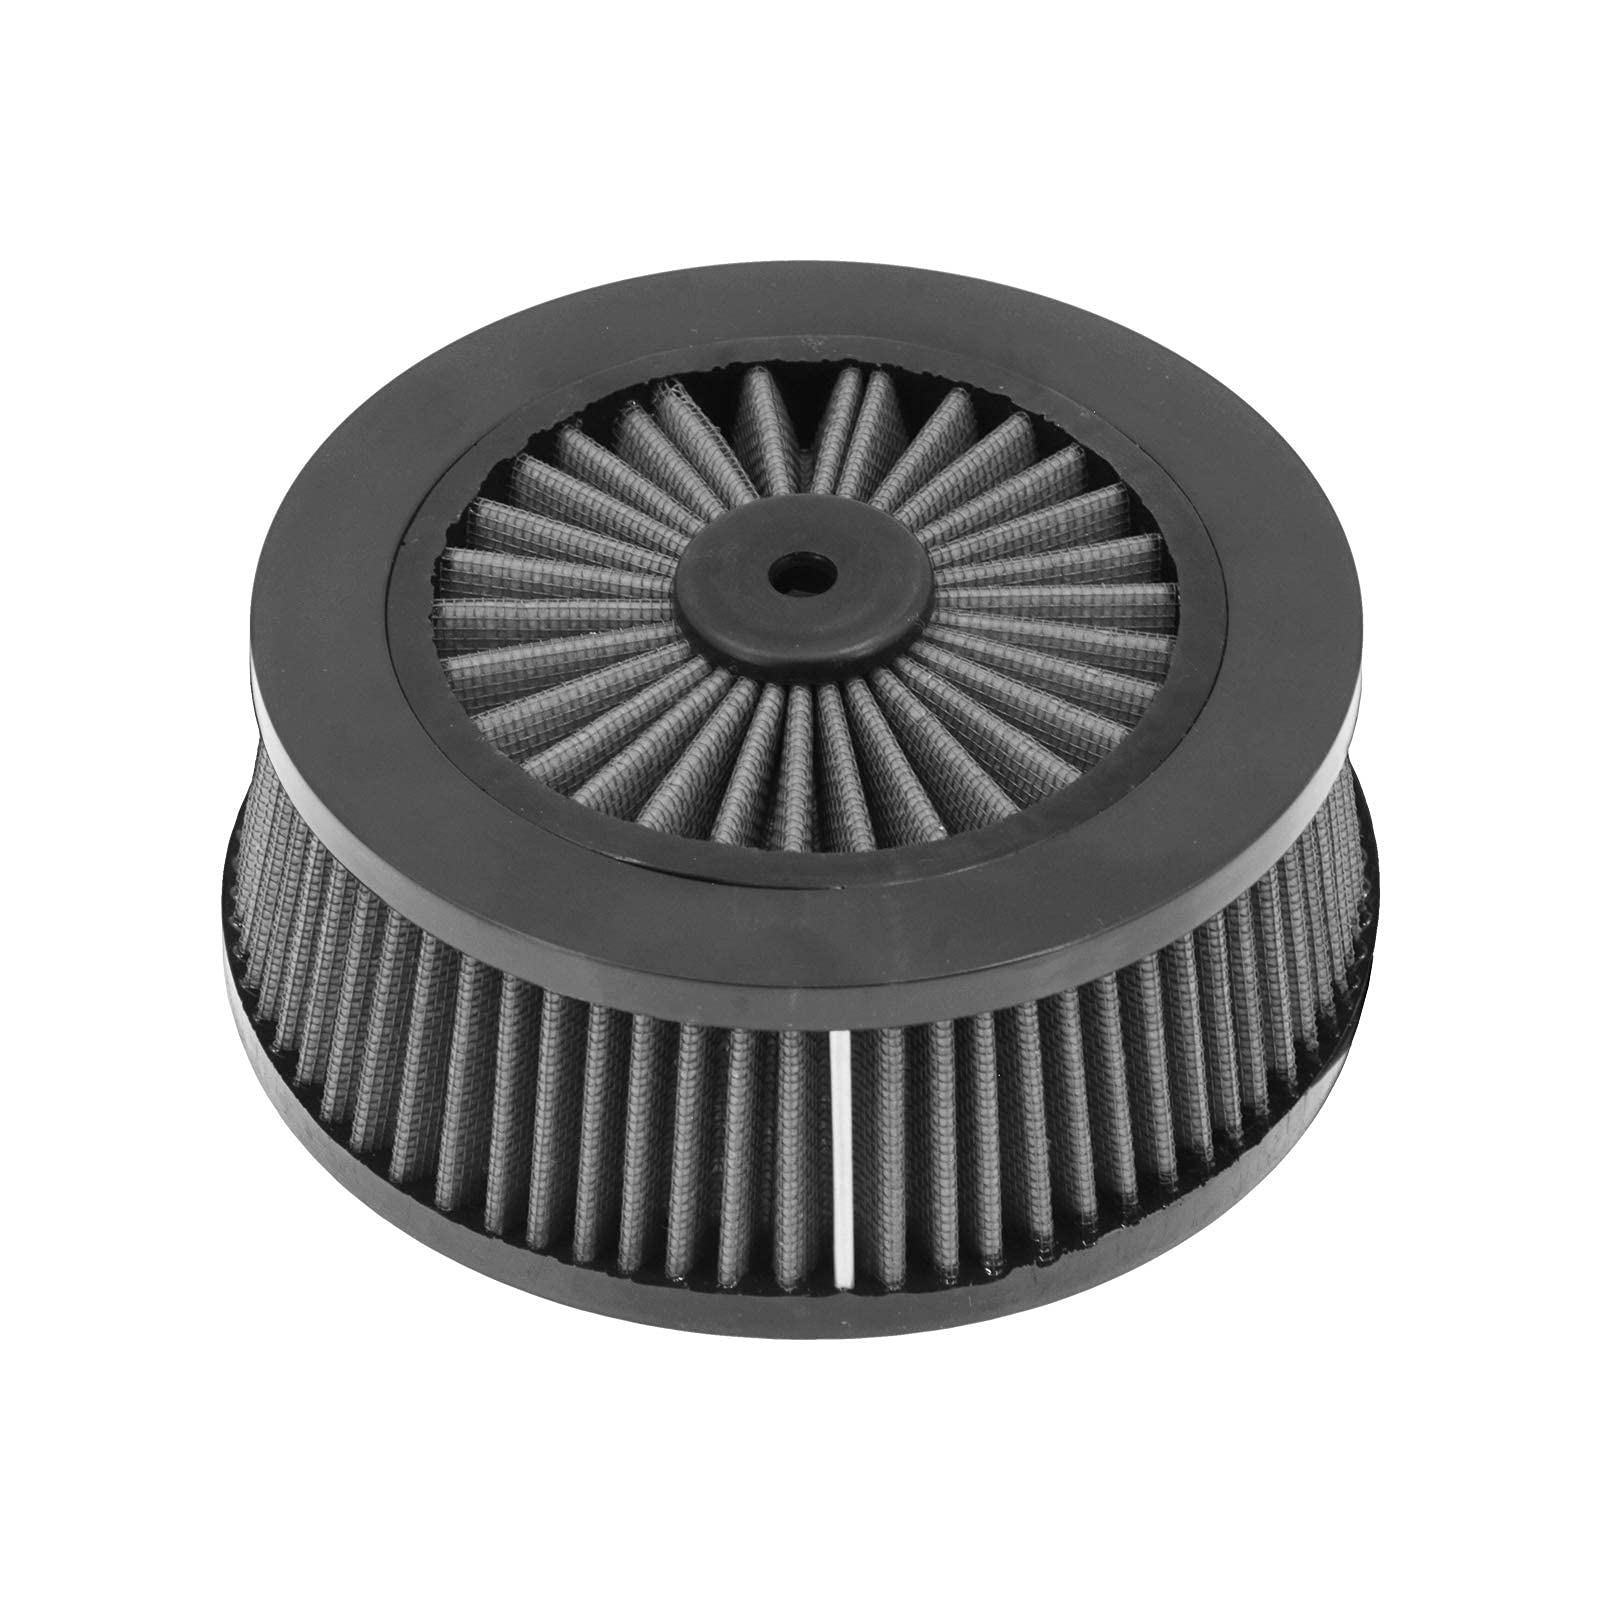 HDBUBALUS Motorcycle Air Filter Inner Element Grey Fit for Harley Sportster Dyna Softail Touring 1 Pcs von HDBUBALUS